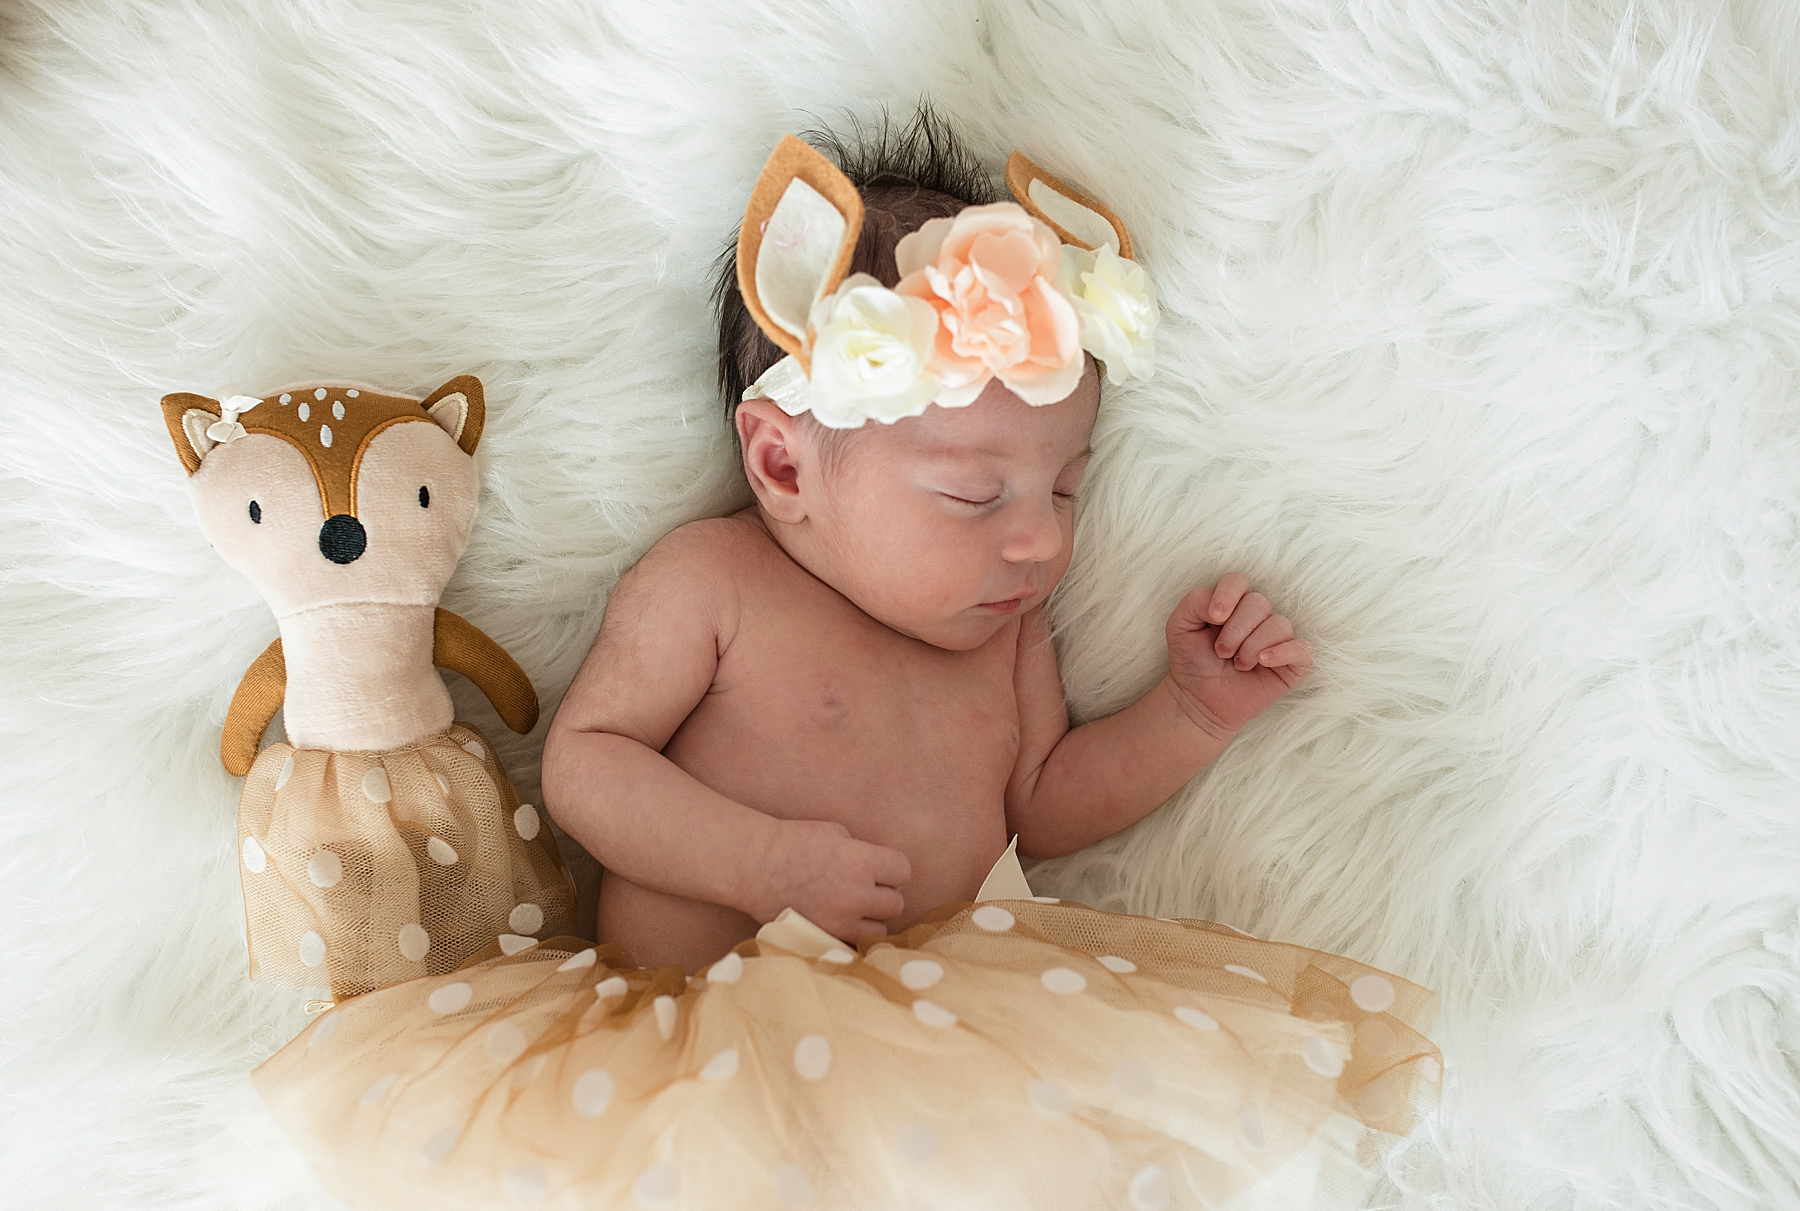 Newborn baby girl in deer outfit with flower crown in pink and white nursery | In-Home Newborn Photo Session | Lindsey Dutton Photography | Dallas Area Family Photographer | newborn session, newborn posing ideas, newborn photos, girl nursery inspiration | via lindseyduttonphotography.com